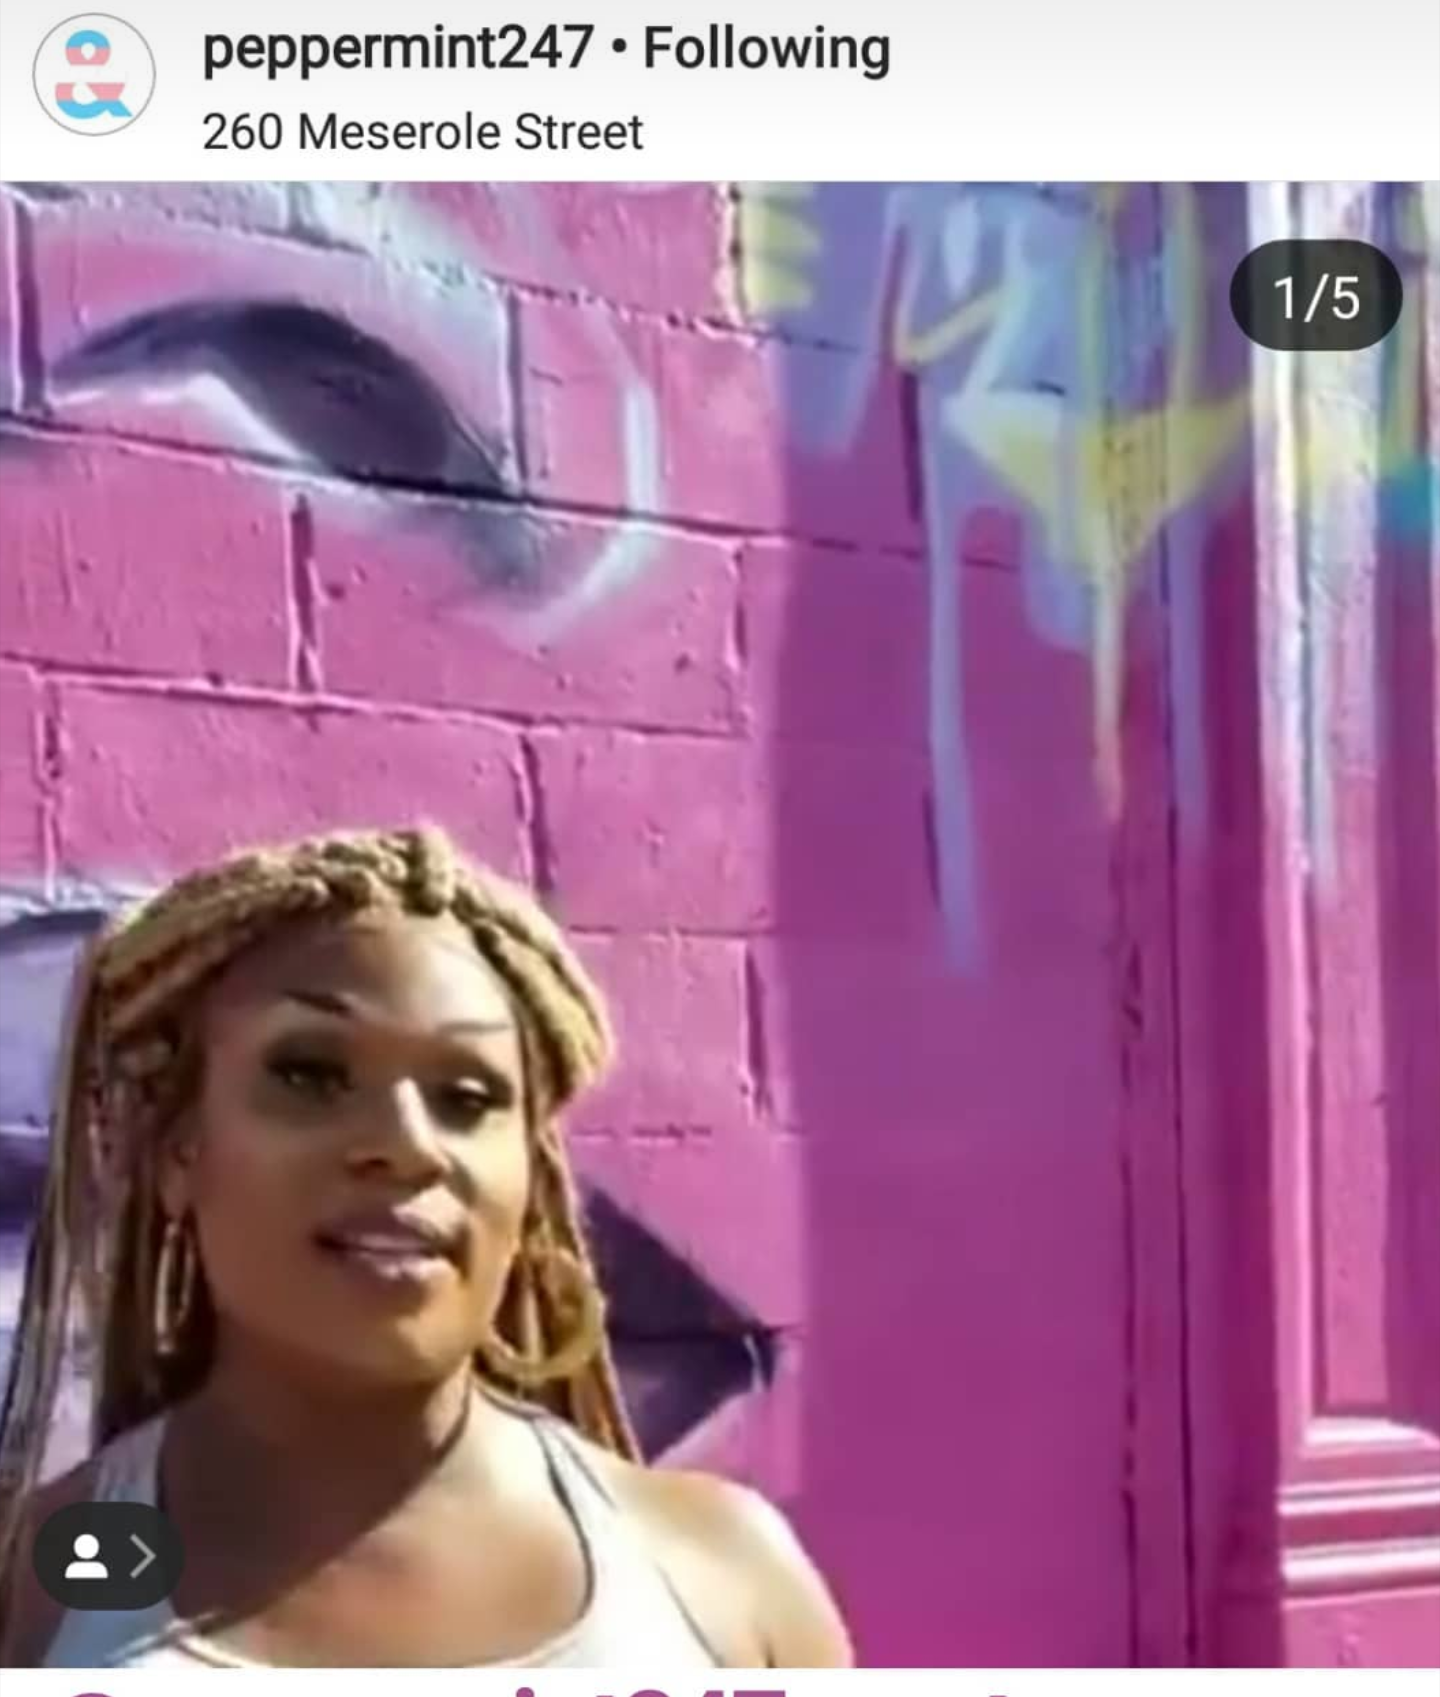 Drag queen Peppermint visits the mural